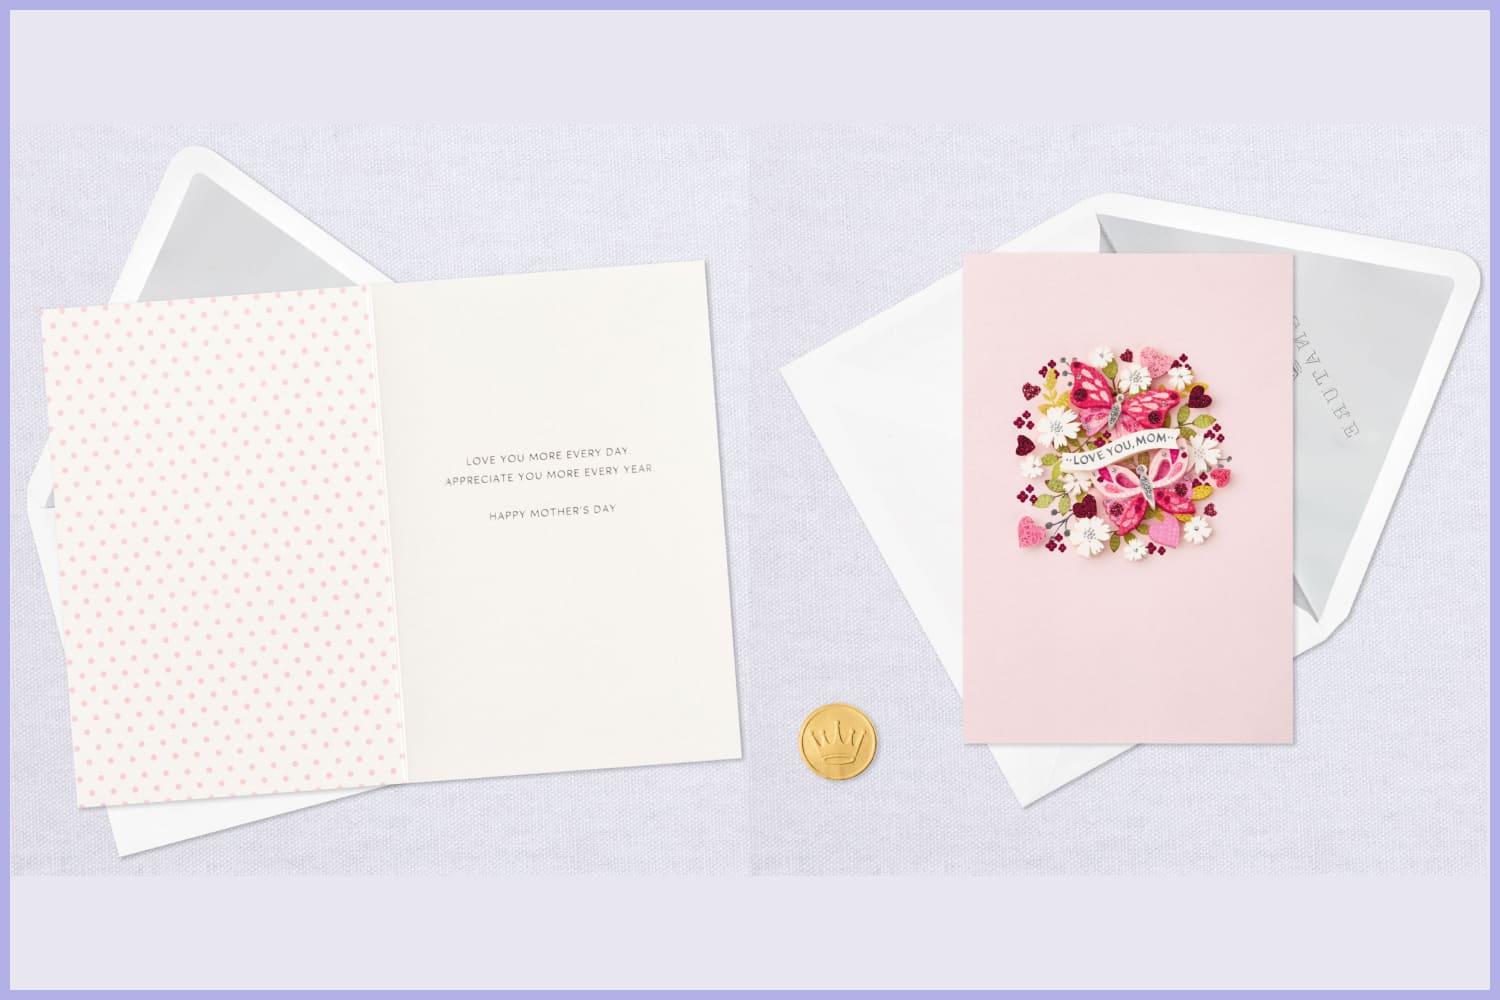 Photo of cards for Mother's Day with the image of a bouquet of flowers and butterflies.